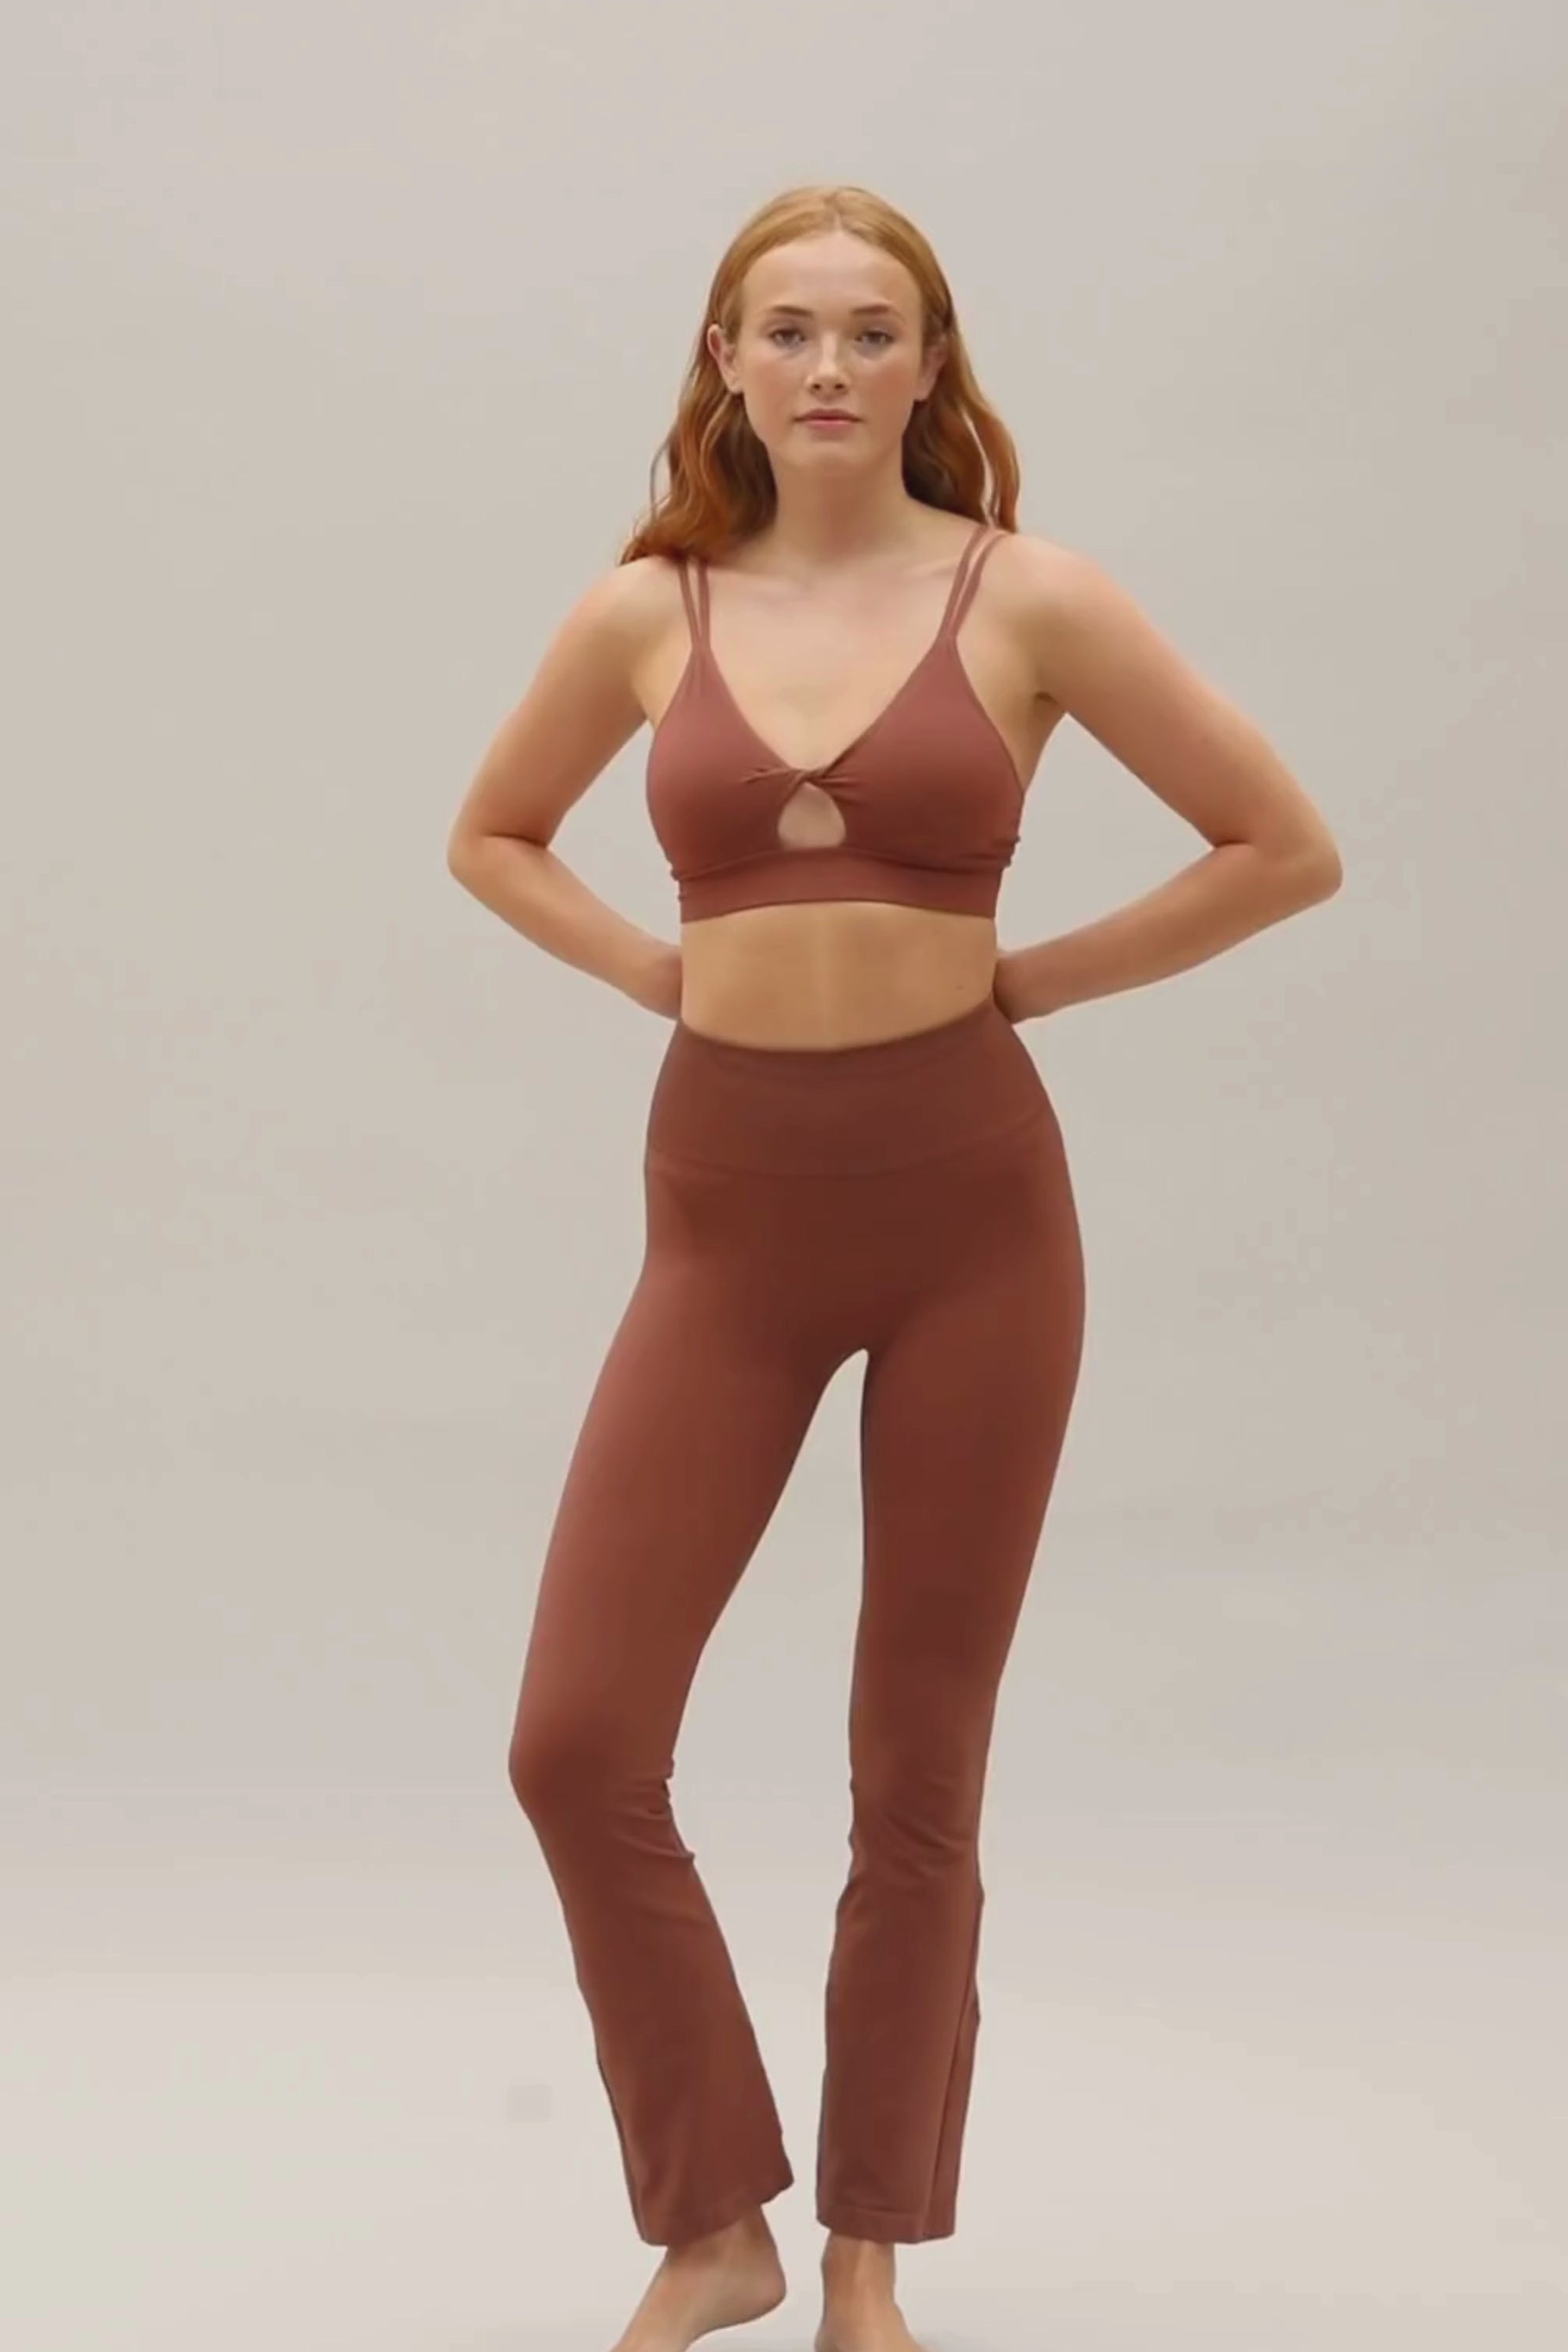 Cinnamon flare leggings with Cinnamon supportive sports bra by sustainable women's activewear brand, Jilla. 